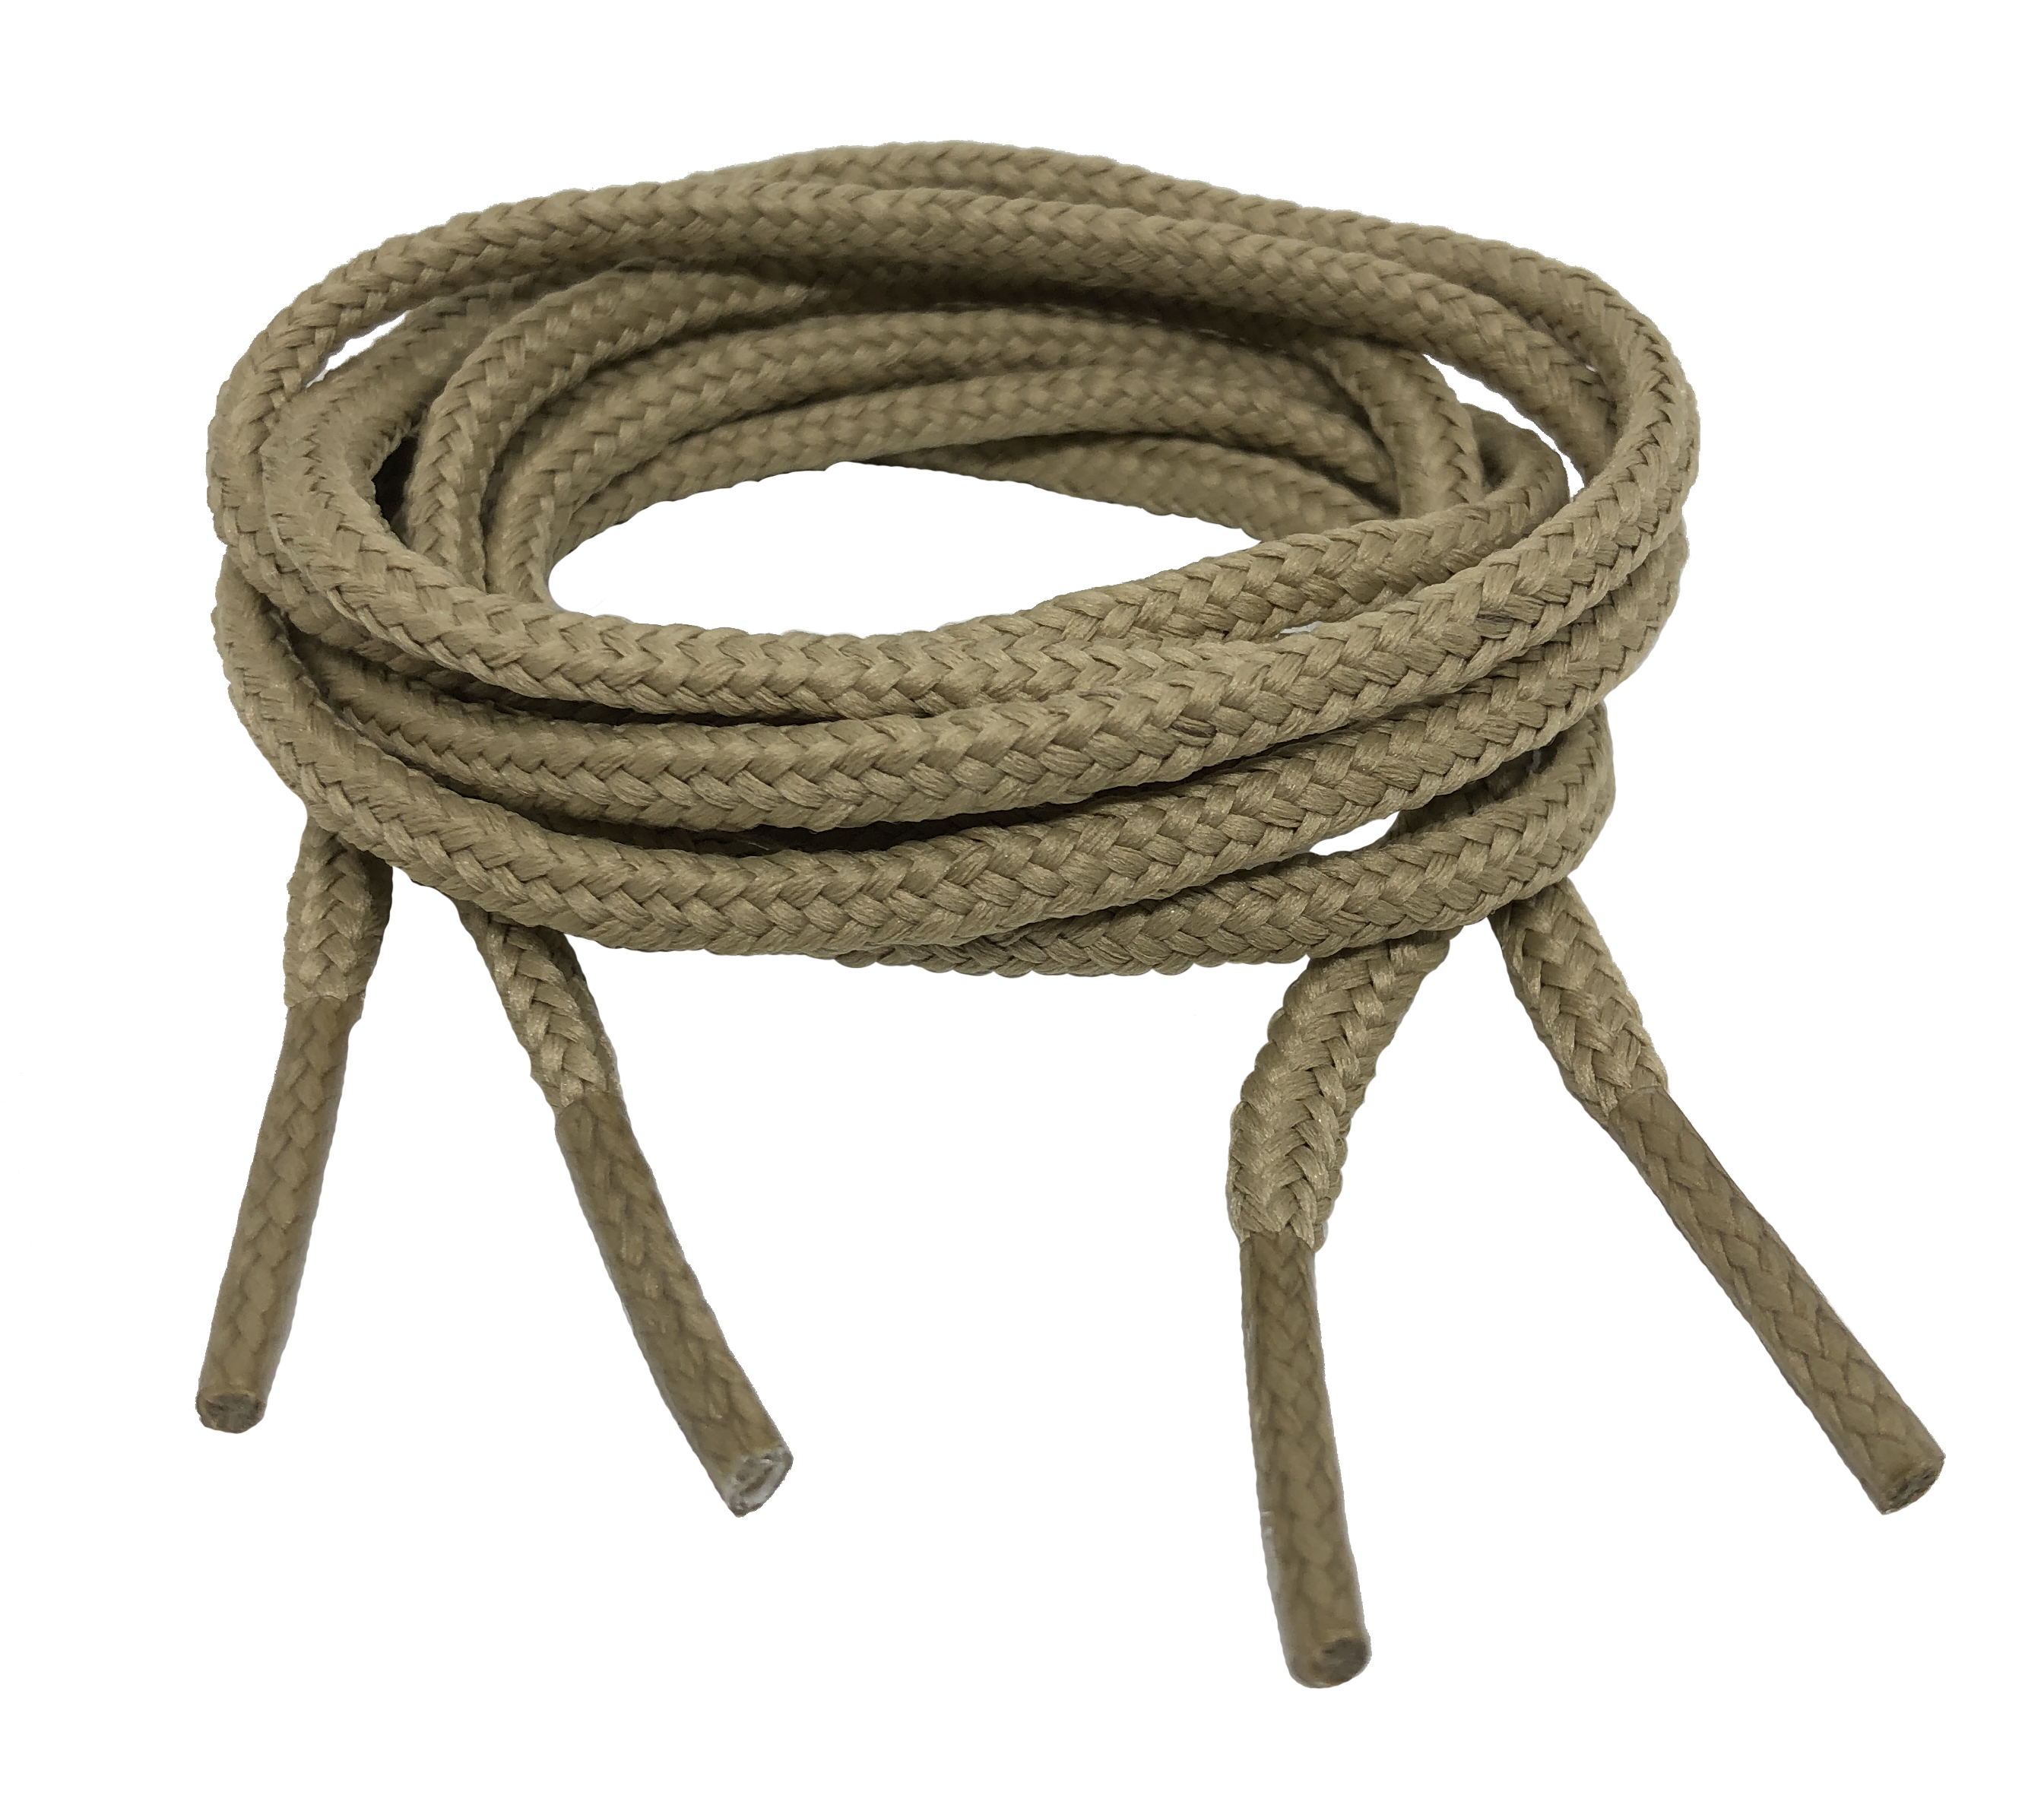 ROUND WHEAT and OATMEAL SHOE LACES LONG SHOELACES - 3mm wide - HIGH ...